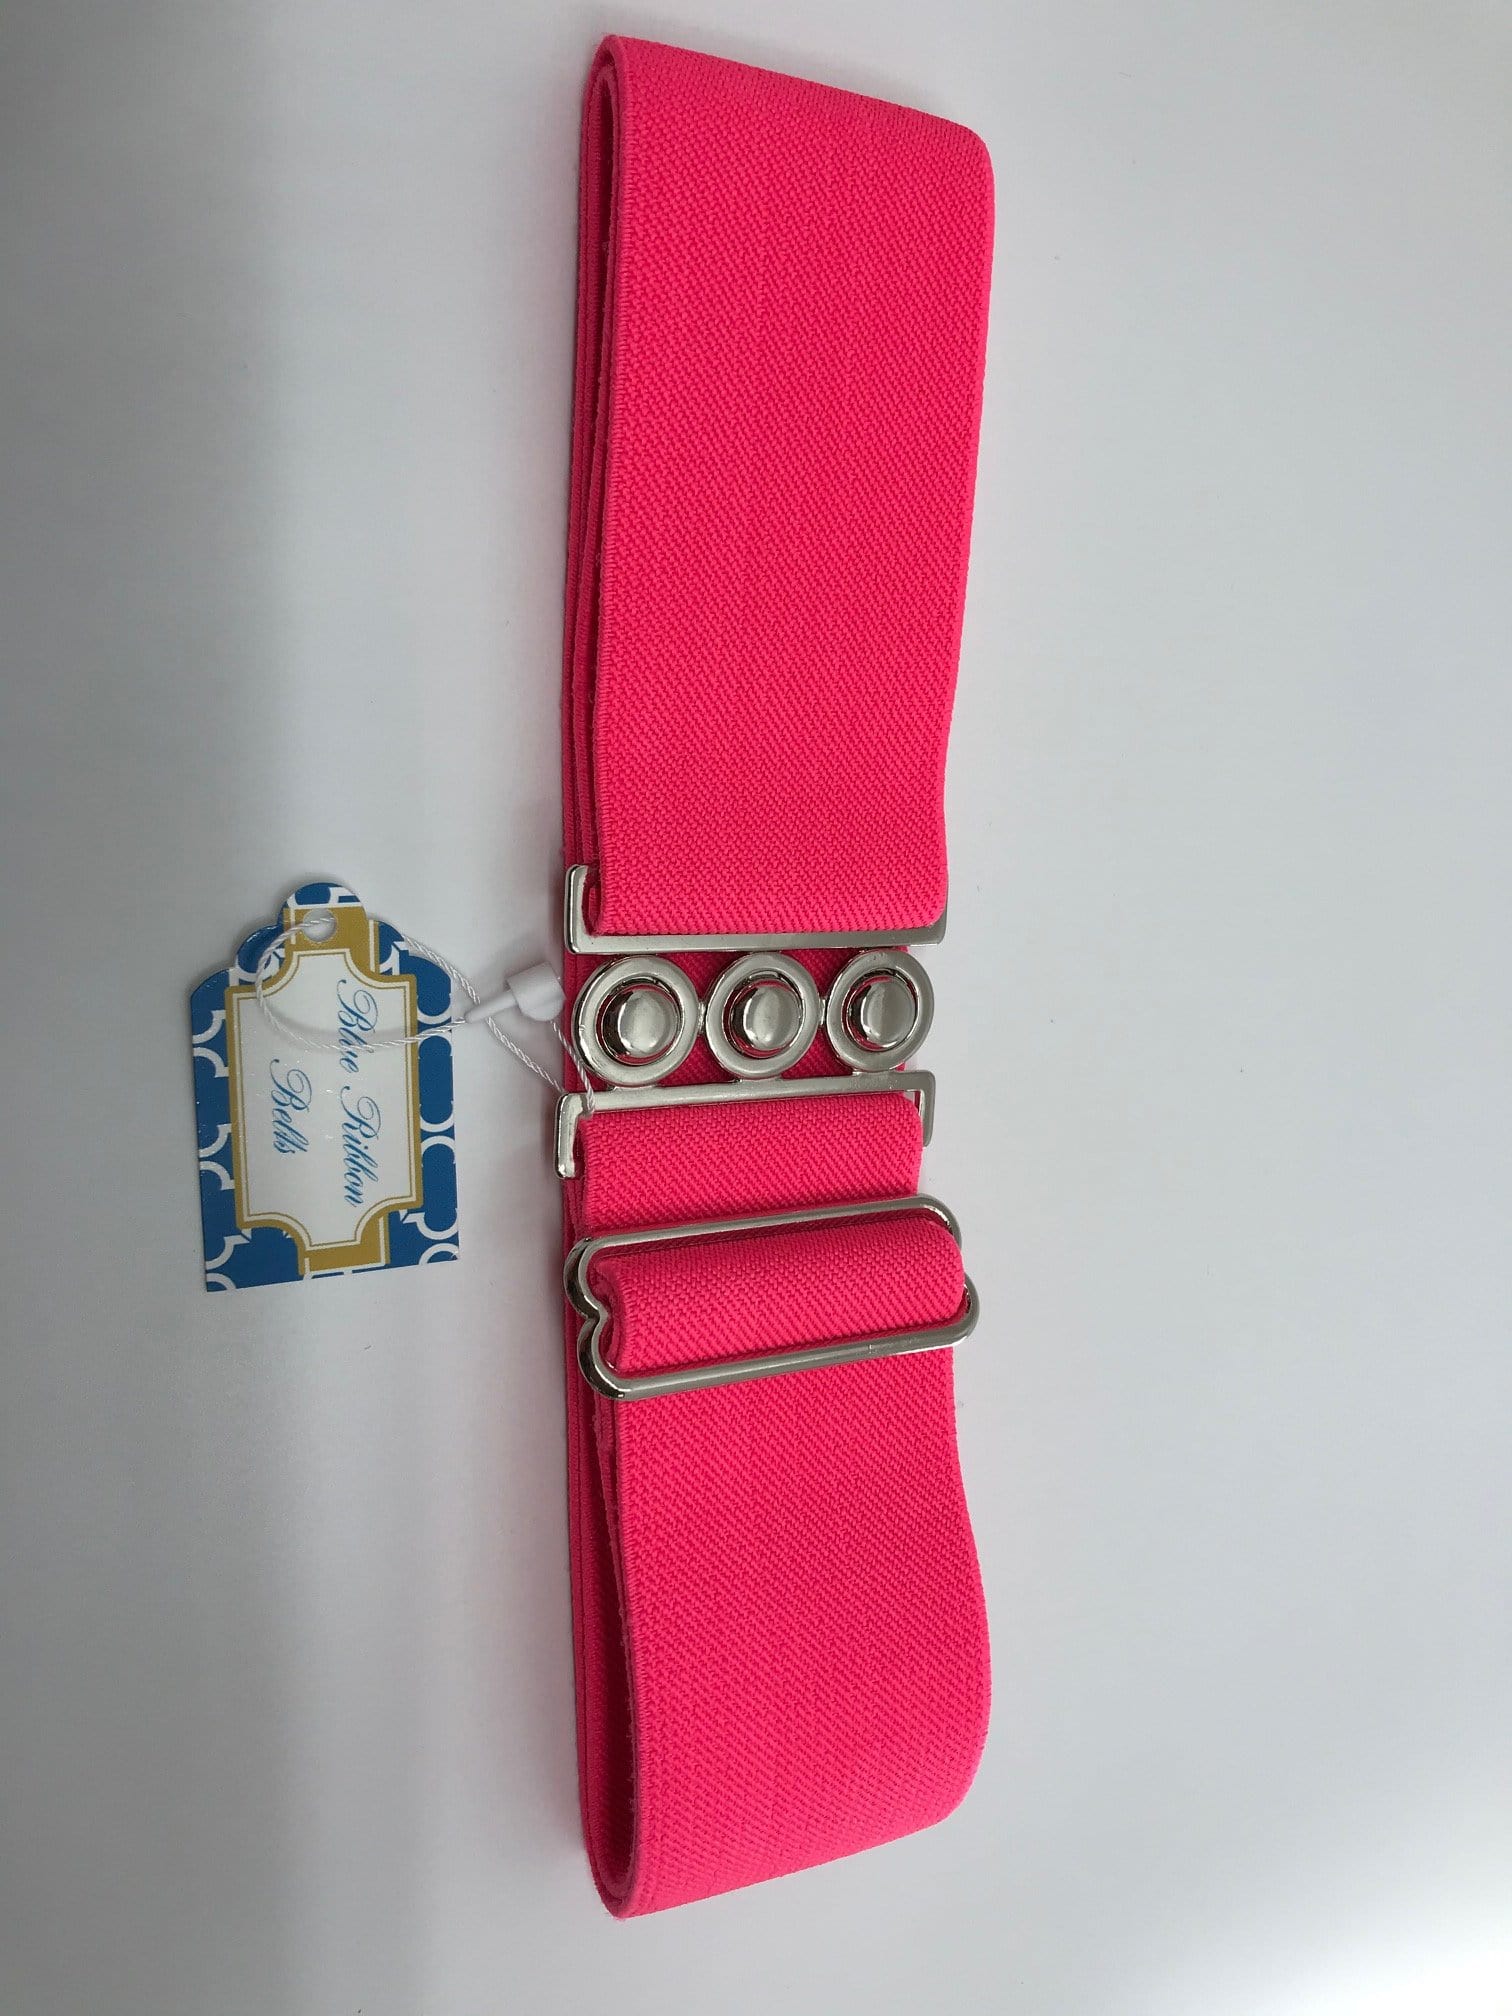 Blue Ribbon Belts Belt Bright Pink Blue Ribbon Belts - 2 Inch equestrian team apparel online tack store mobile tack store custom farm apparel custom show stable clothing equestrian lifestyle horse show clothing riding clothes horses equestrian tack store